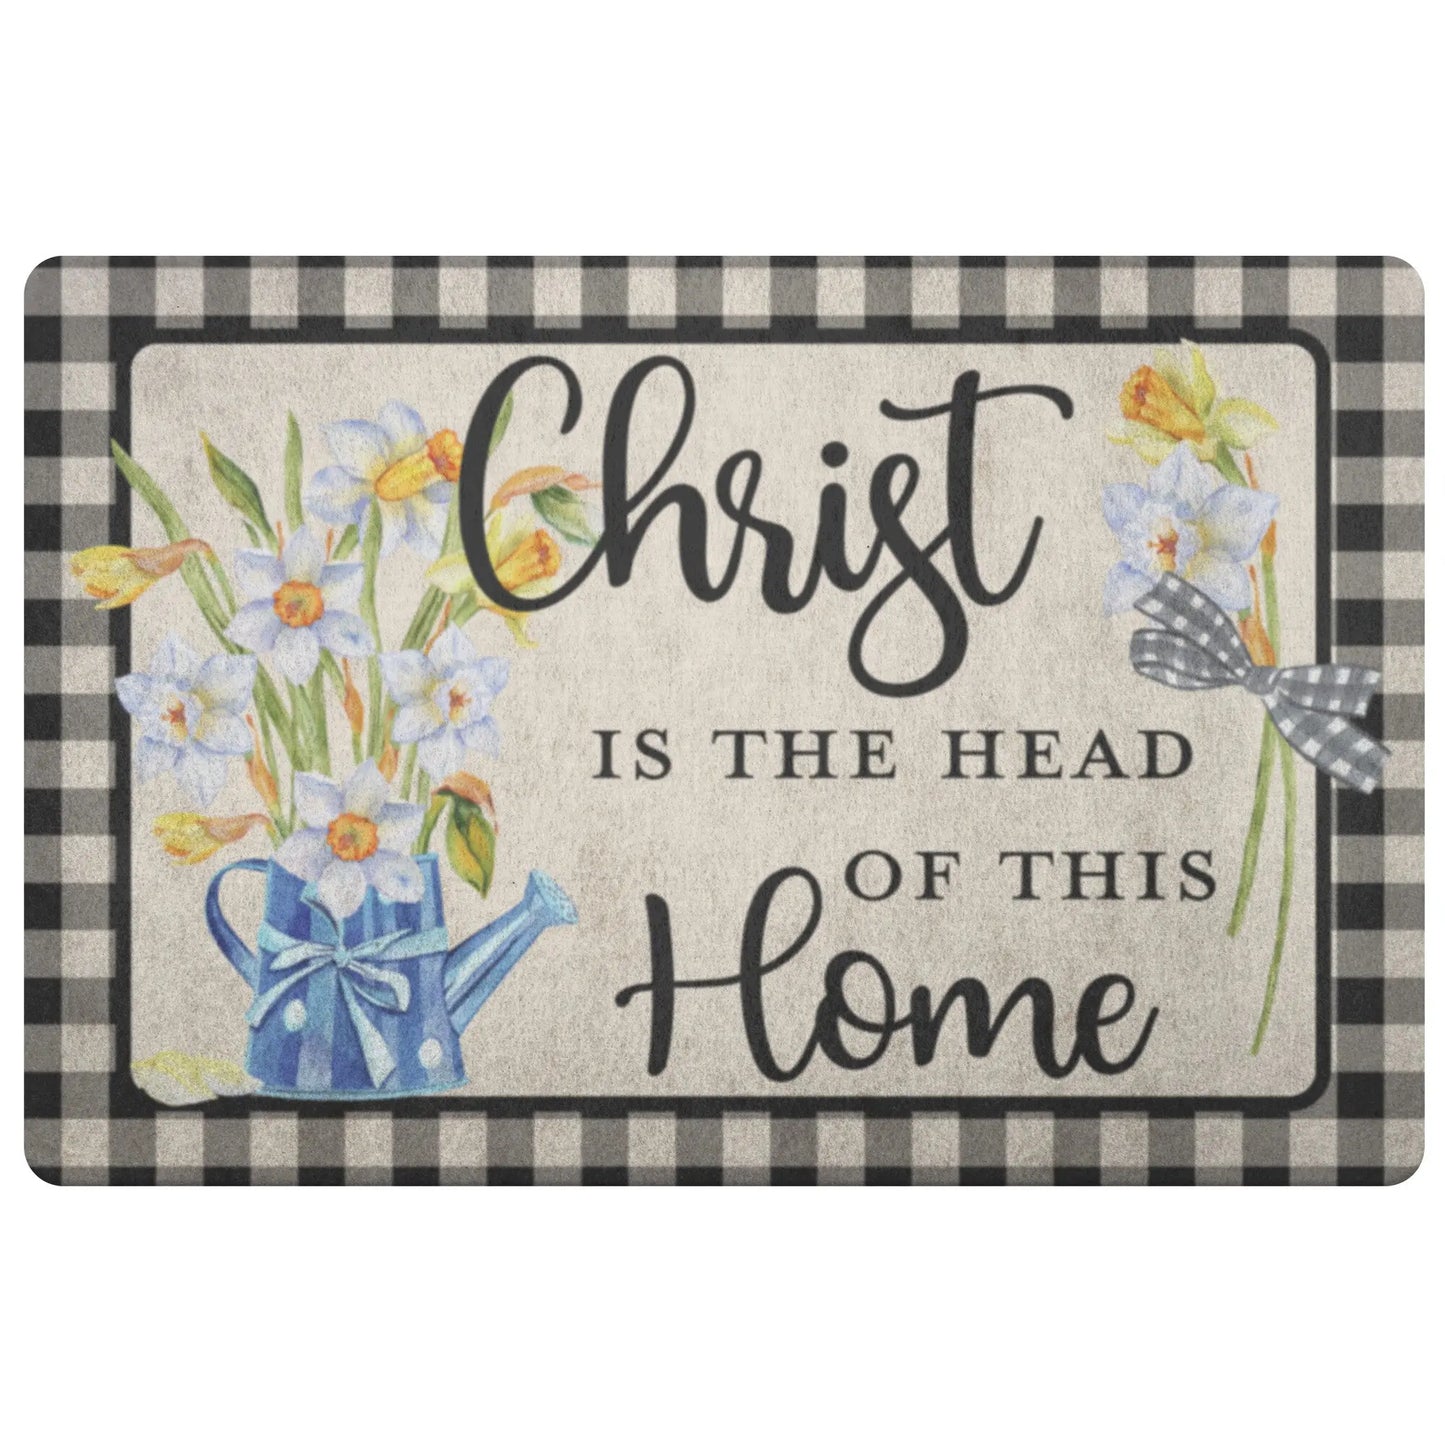 Christ is the Head of this Home Doormat, Daffodils Kitchen Mat, Christian Doormat teelaunch